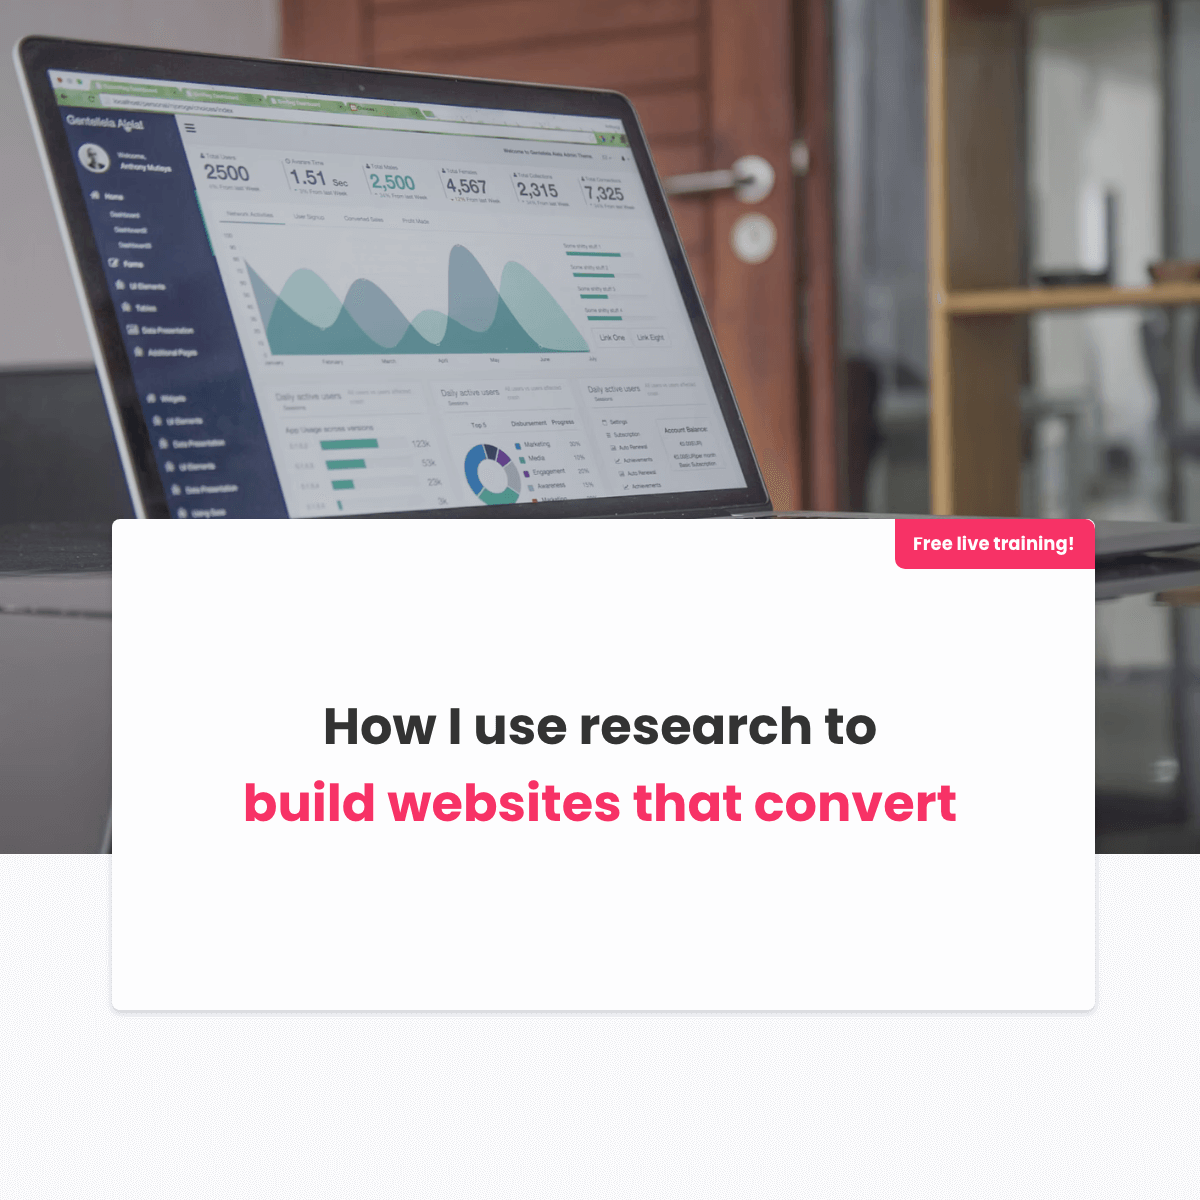 Free live training! How I use research to build websites that convert